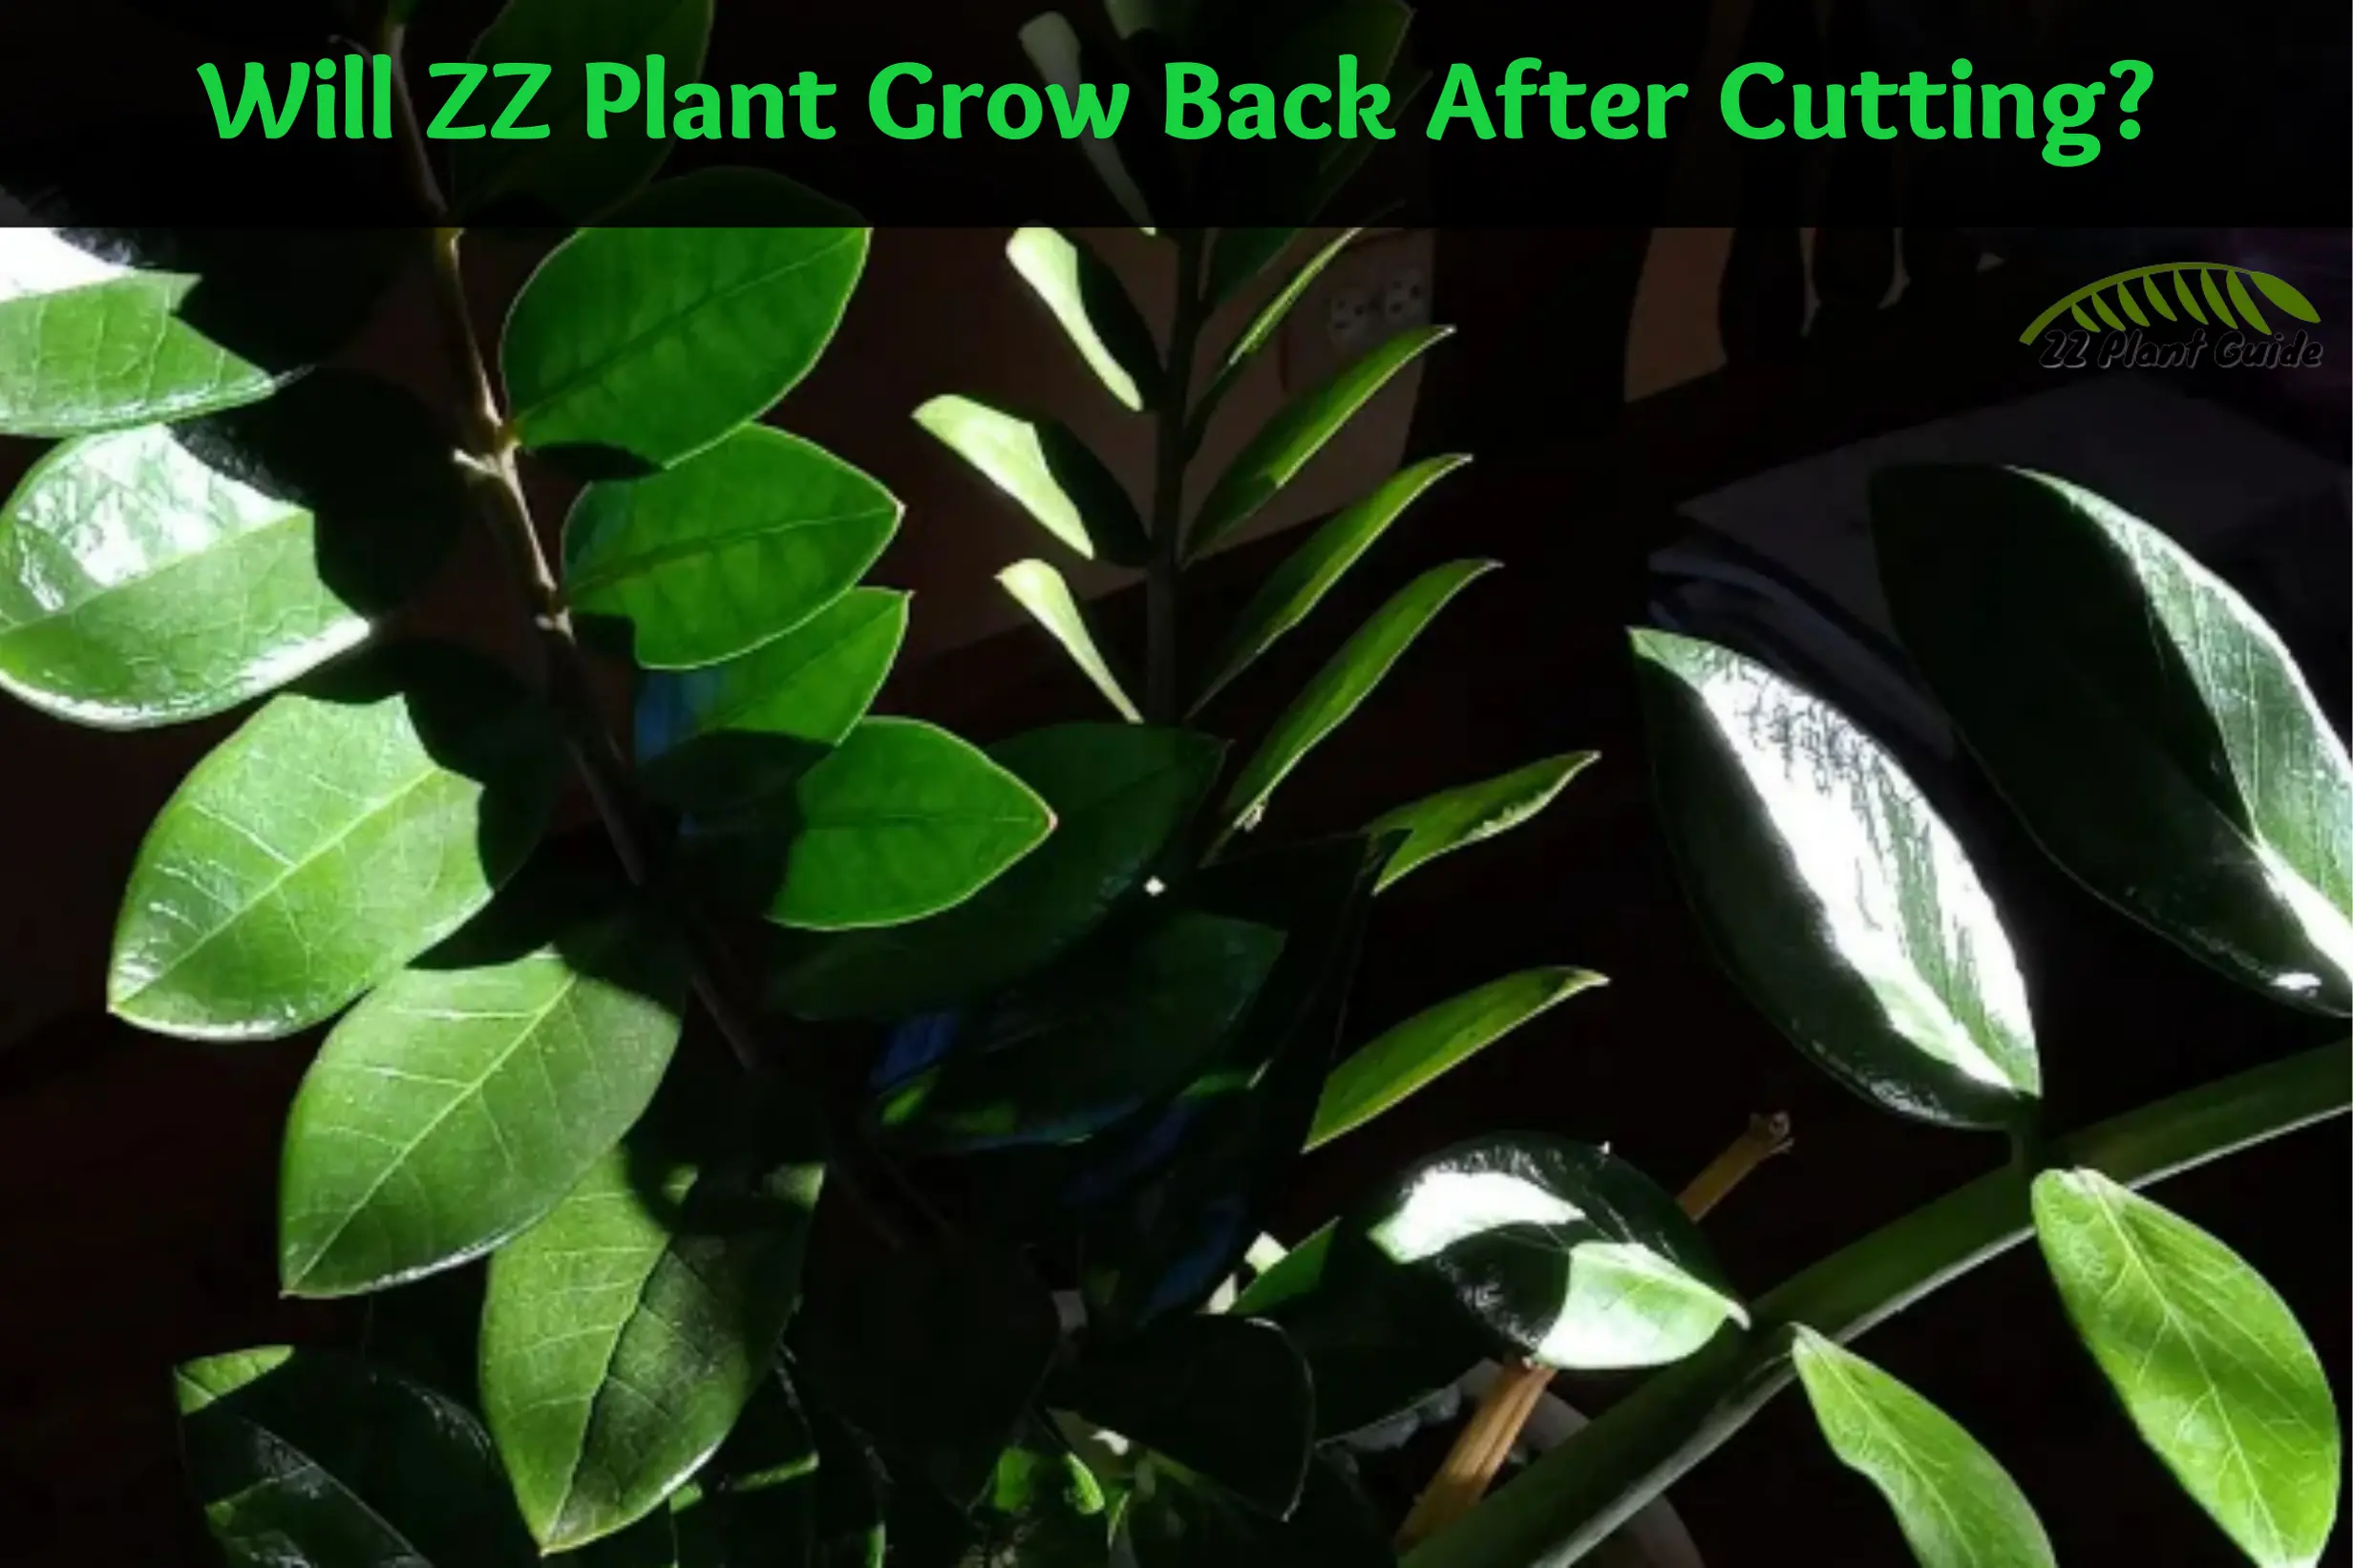 Will ZZ Plant Grow Back After Cutting